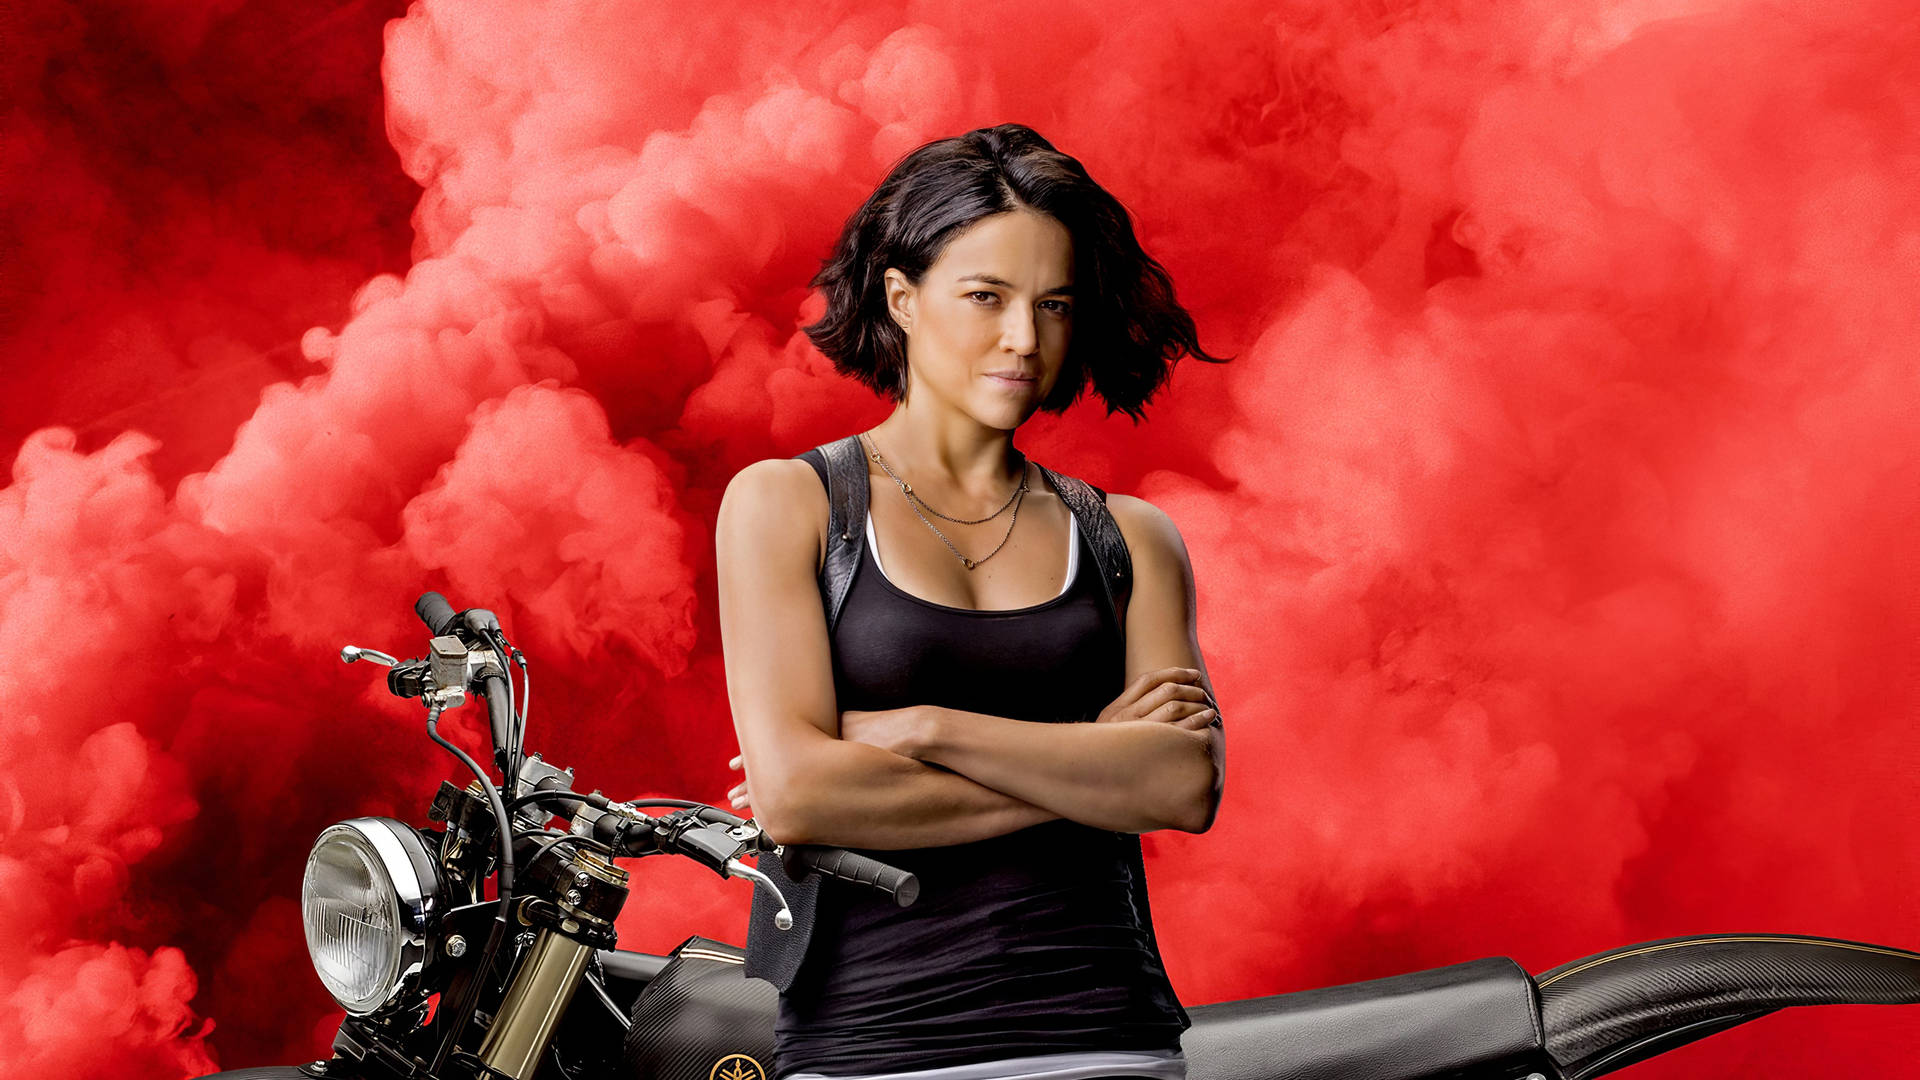 Michellerodriguez I Fast And Furious 9. Wallpaper